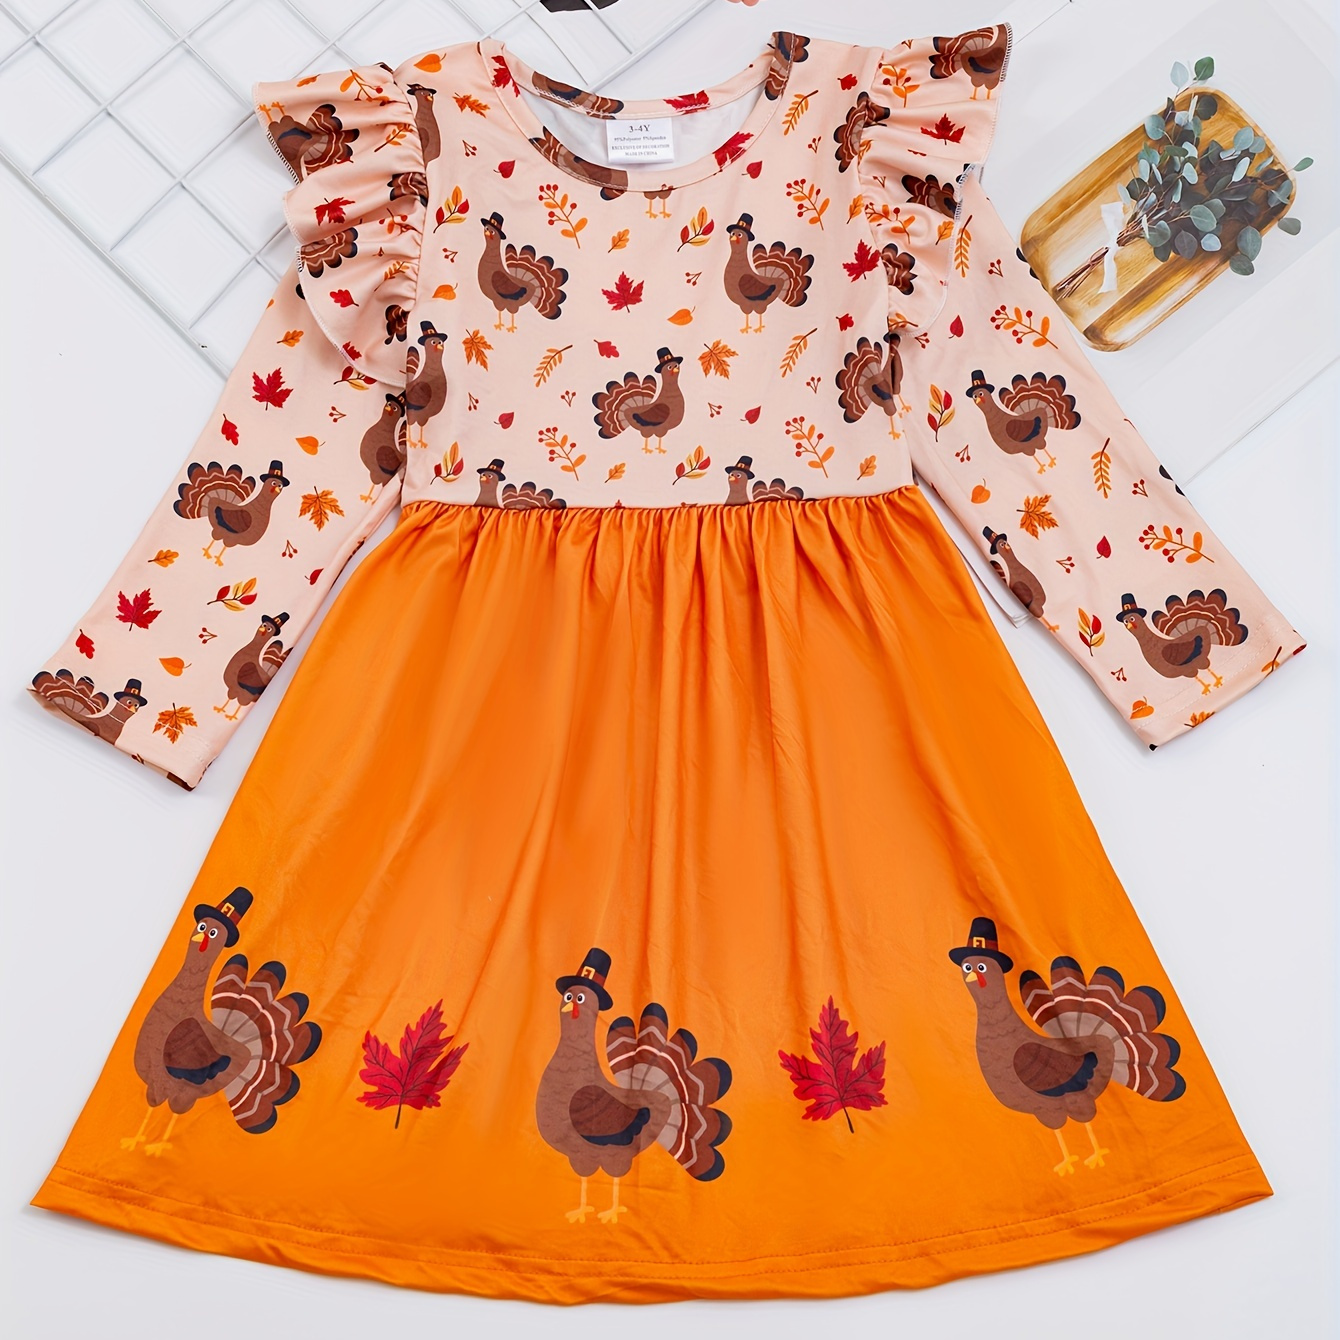 

Cute Girls' Splicing Turkey Print Flutter Trim Dress For Spring Fall Party Kids Clothes